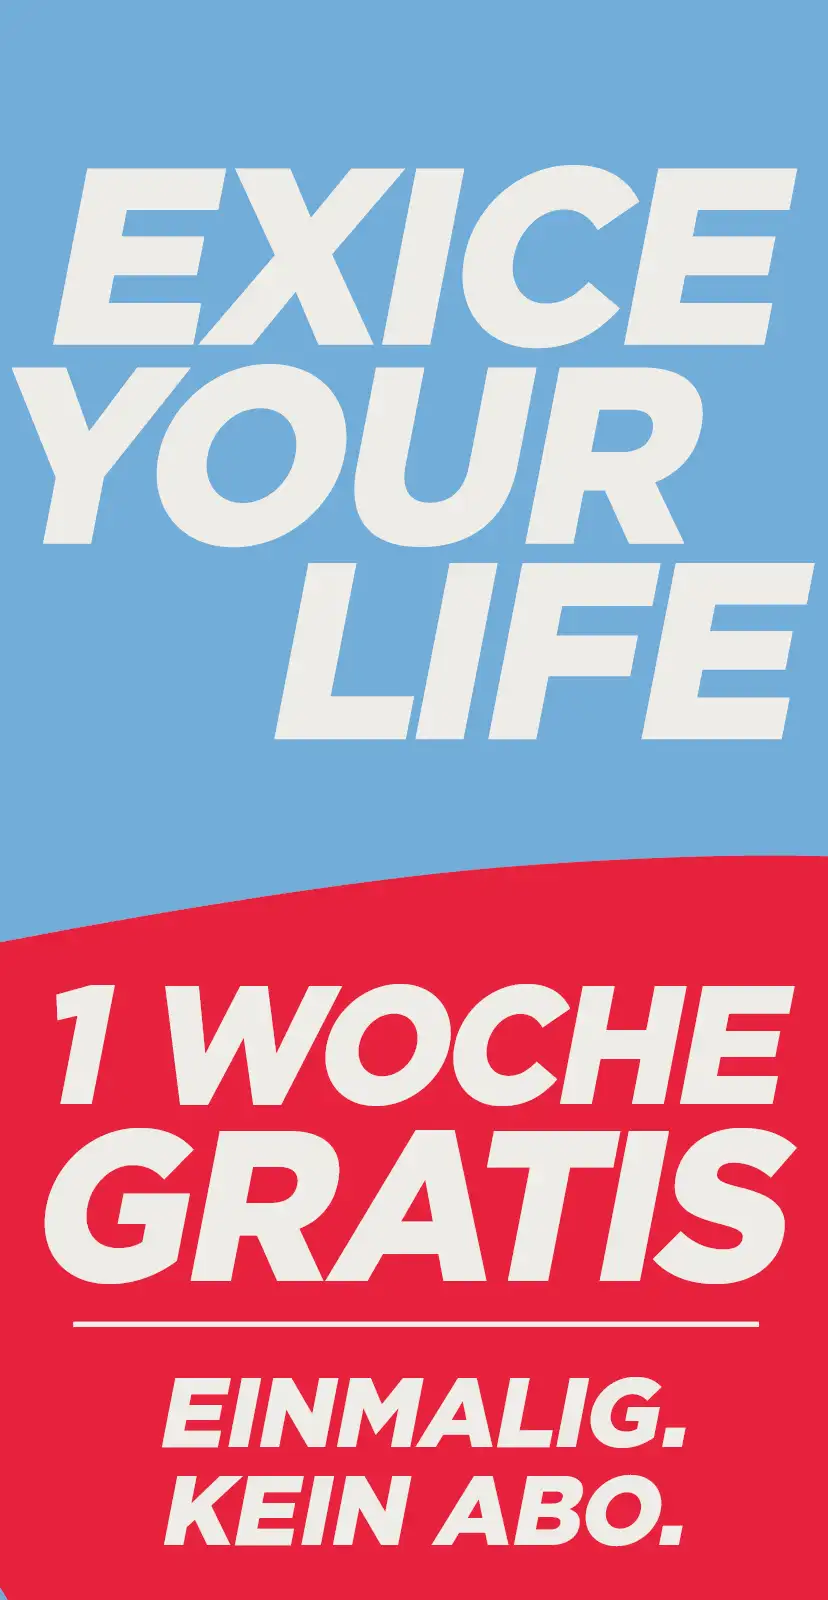 EXICE YOUR LIFE 1WOCHE GRATIS - EINMALIG. OHNE ABO.